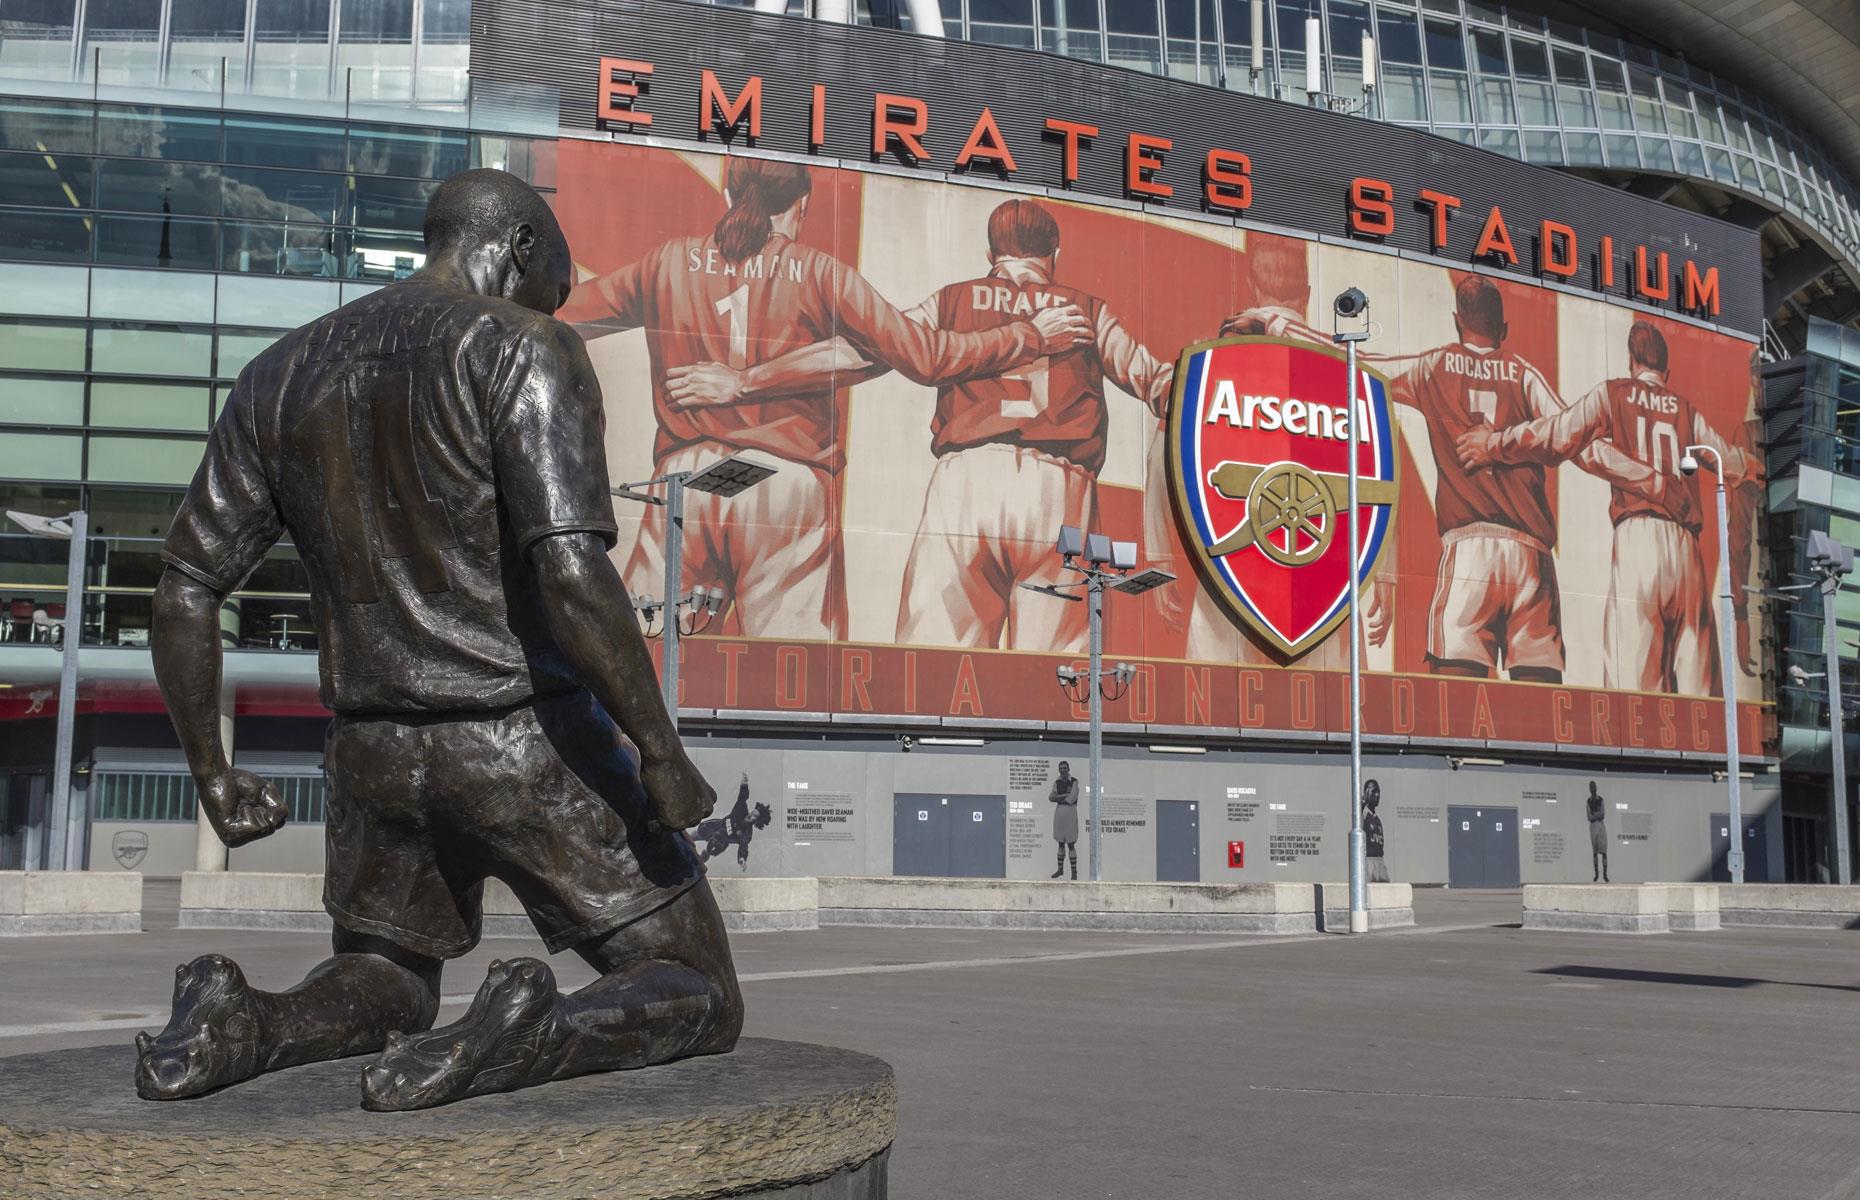 1977 – Arsenal Football Club: $1,000 invested then is worth $382,000 (£261k) today 